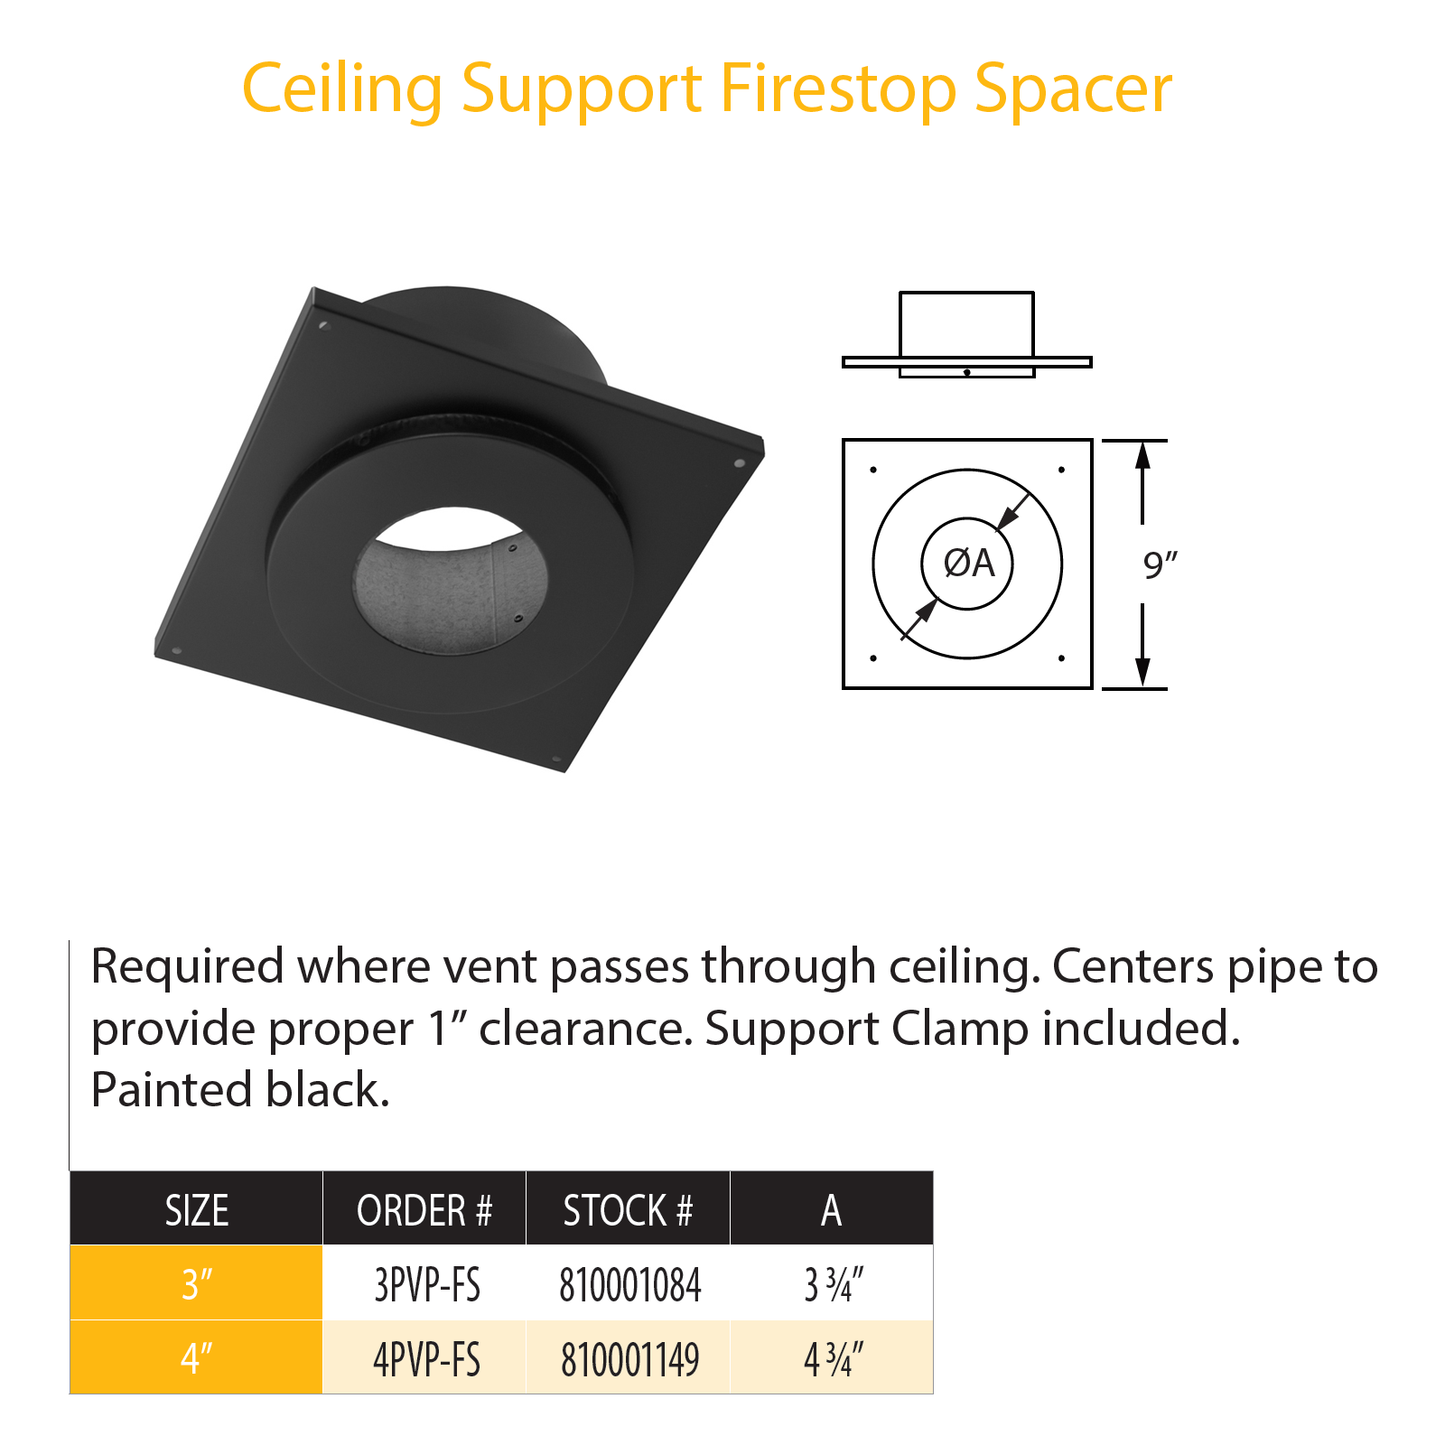 DuraVent PVP Ceiling Support Firestop Spacer (for 1" clrnce) | 4PVP-FS